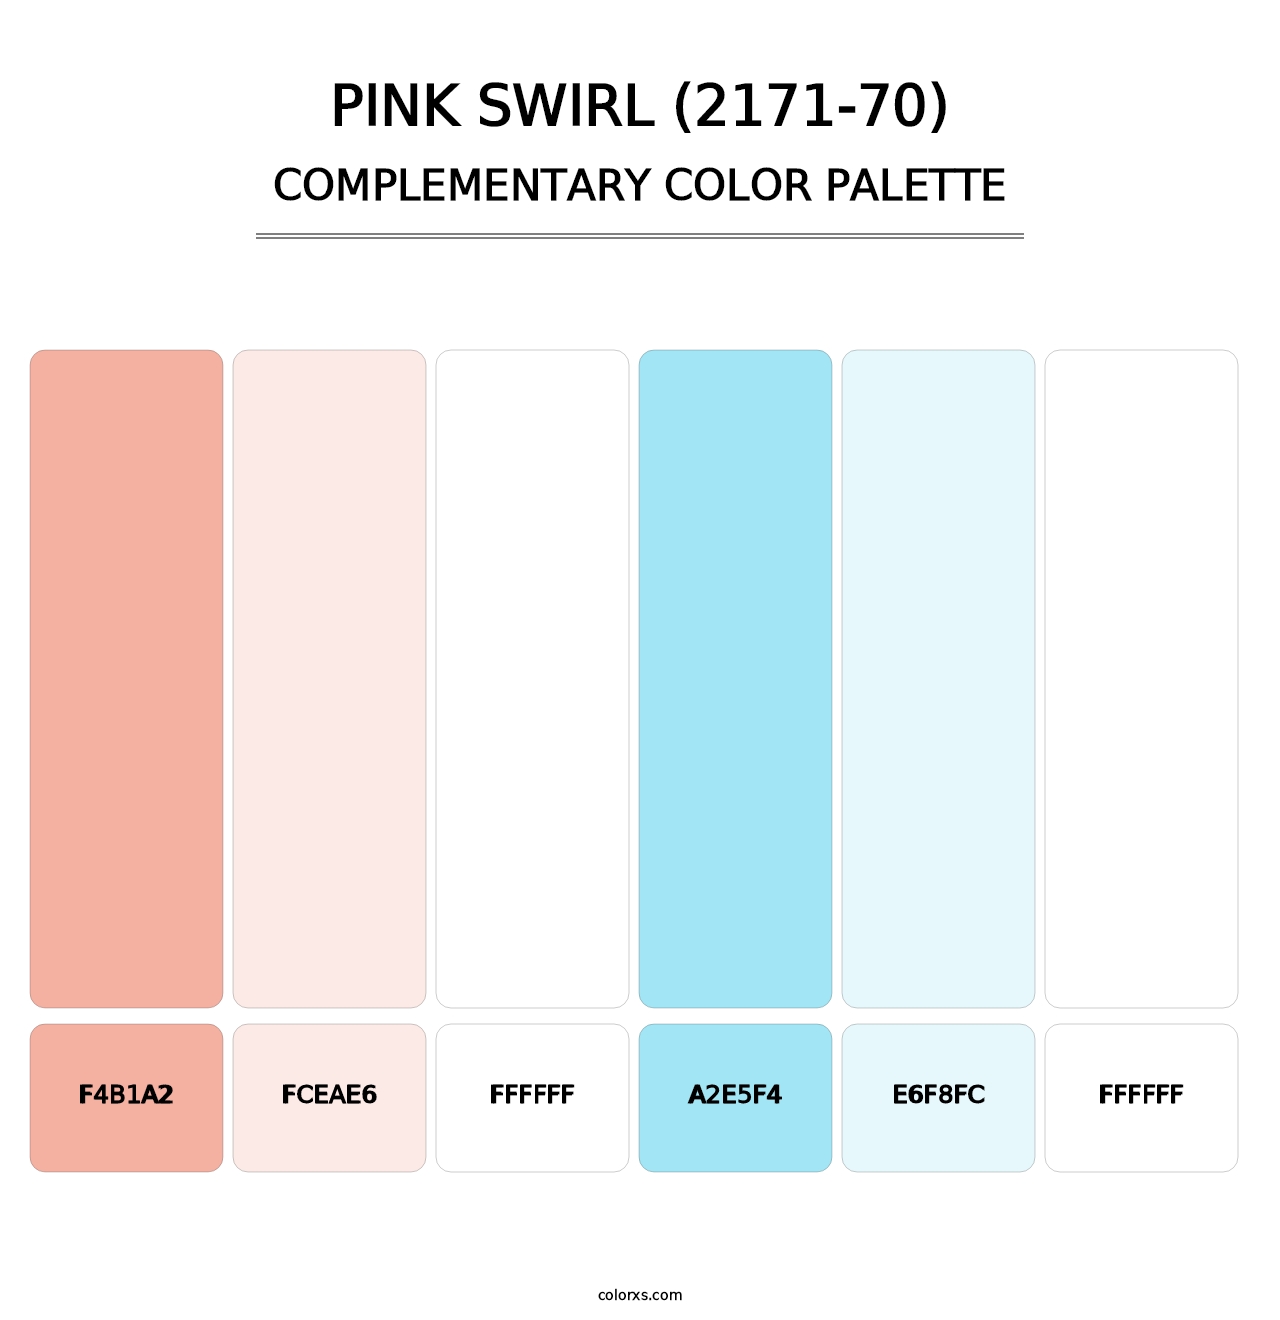 Pink Swirl (2171-70) - Complementary Color Palette